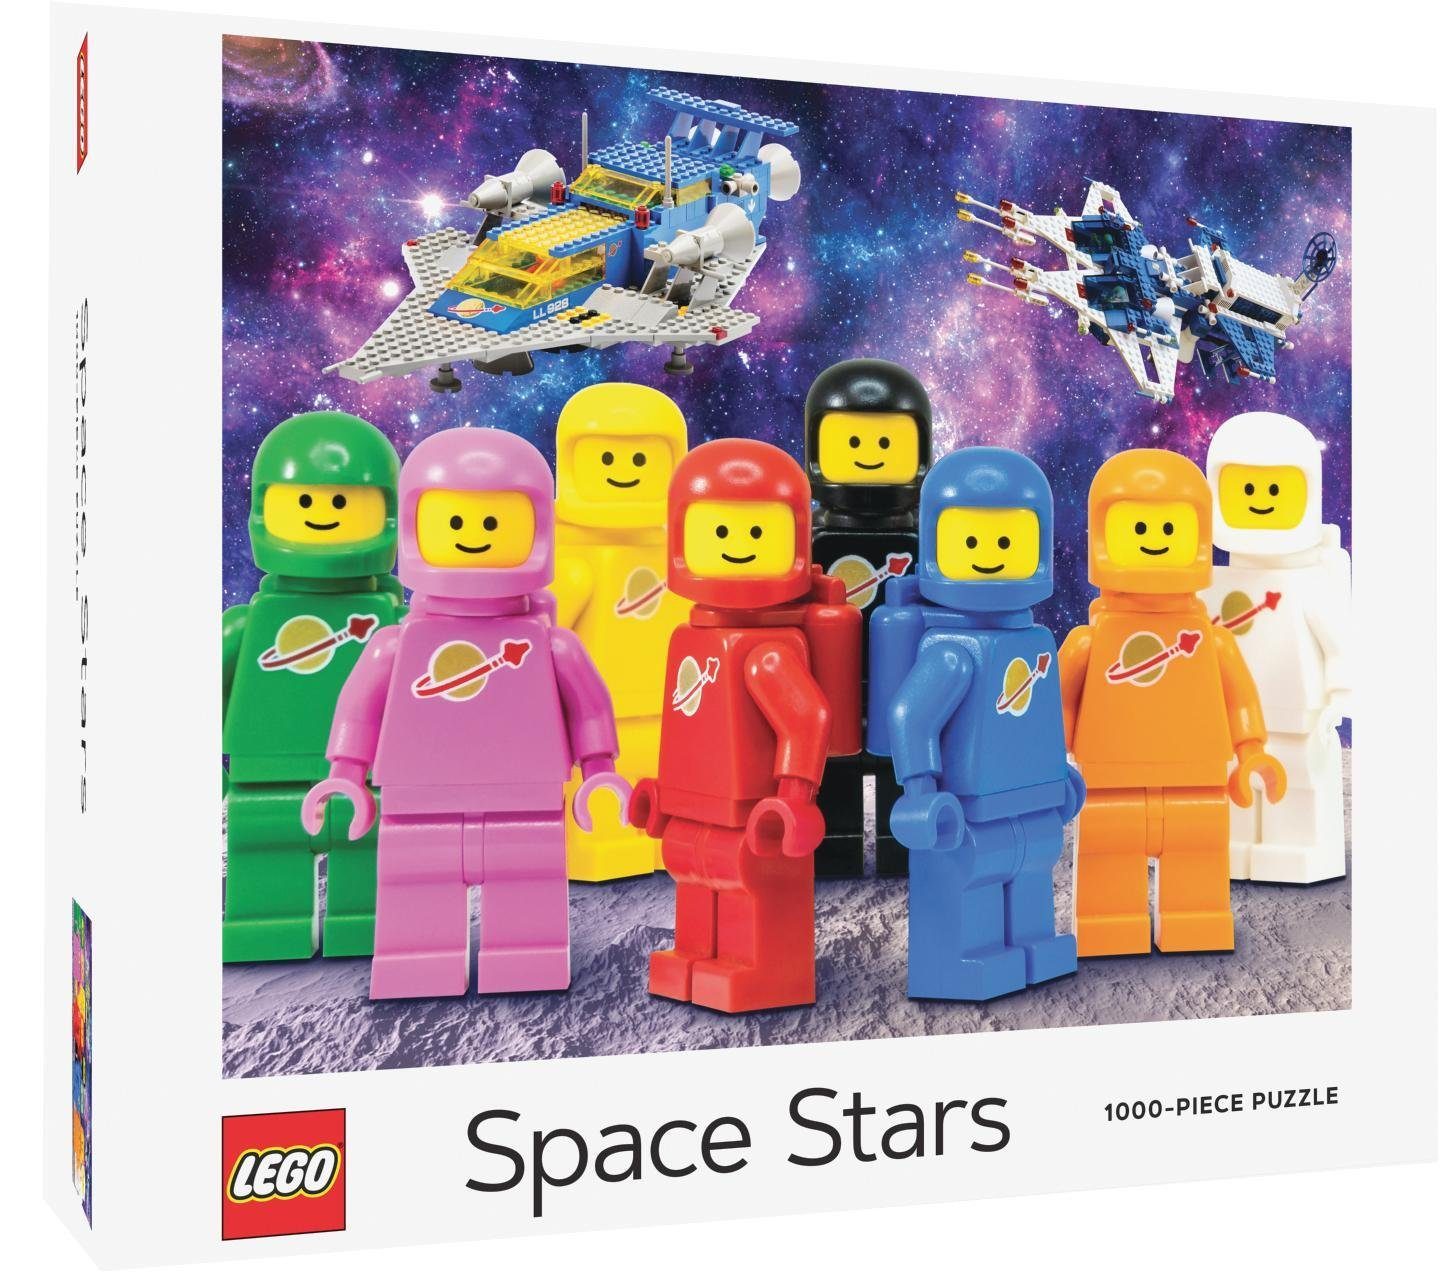 abrams&chronicle Chronicle Books Spiel, Lego Space Stars 1000-Piece Puzzle